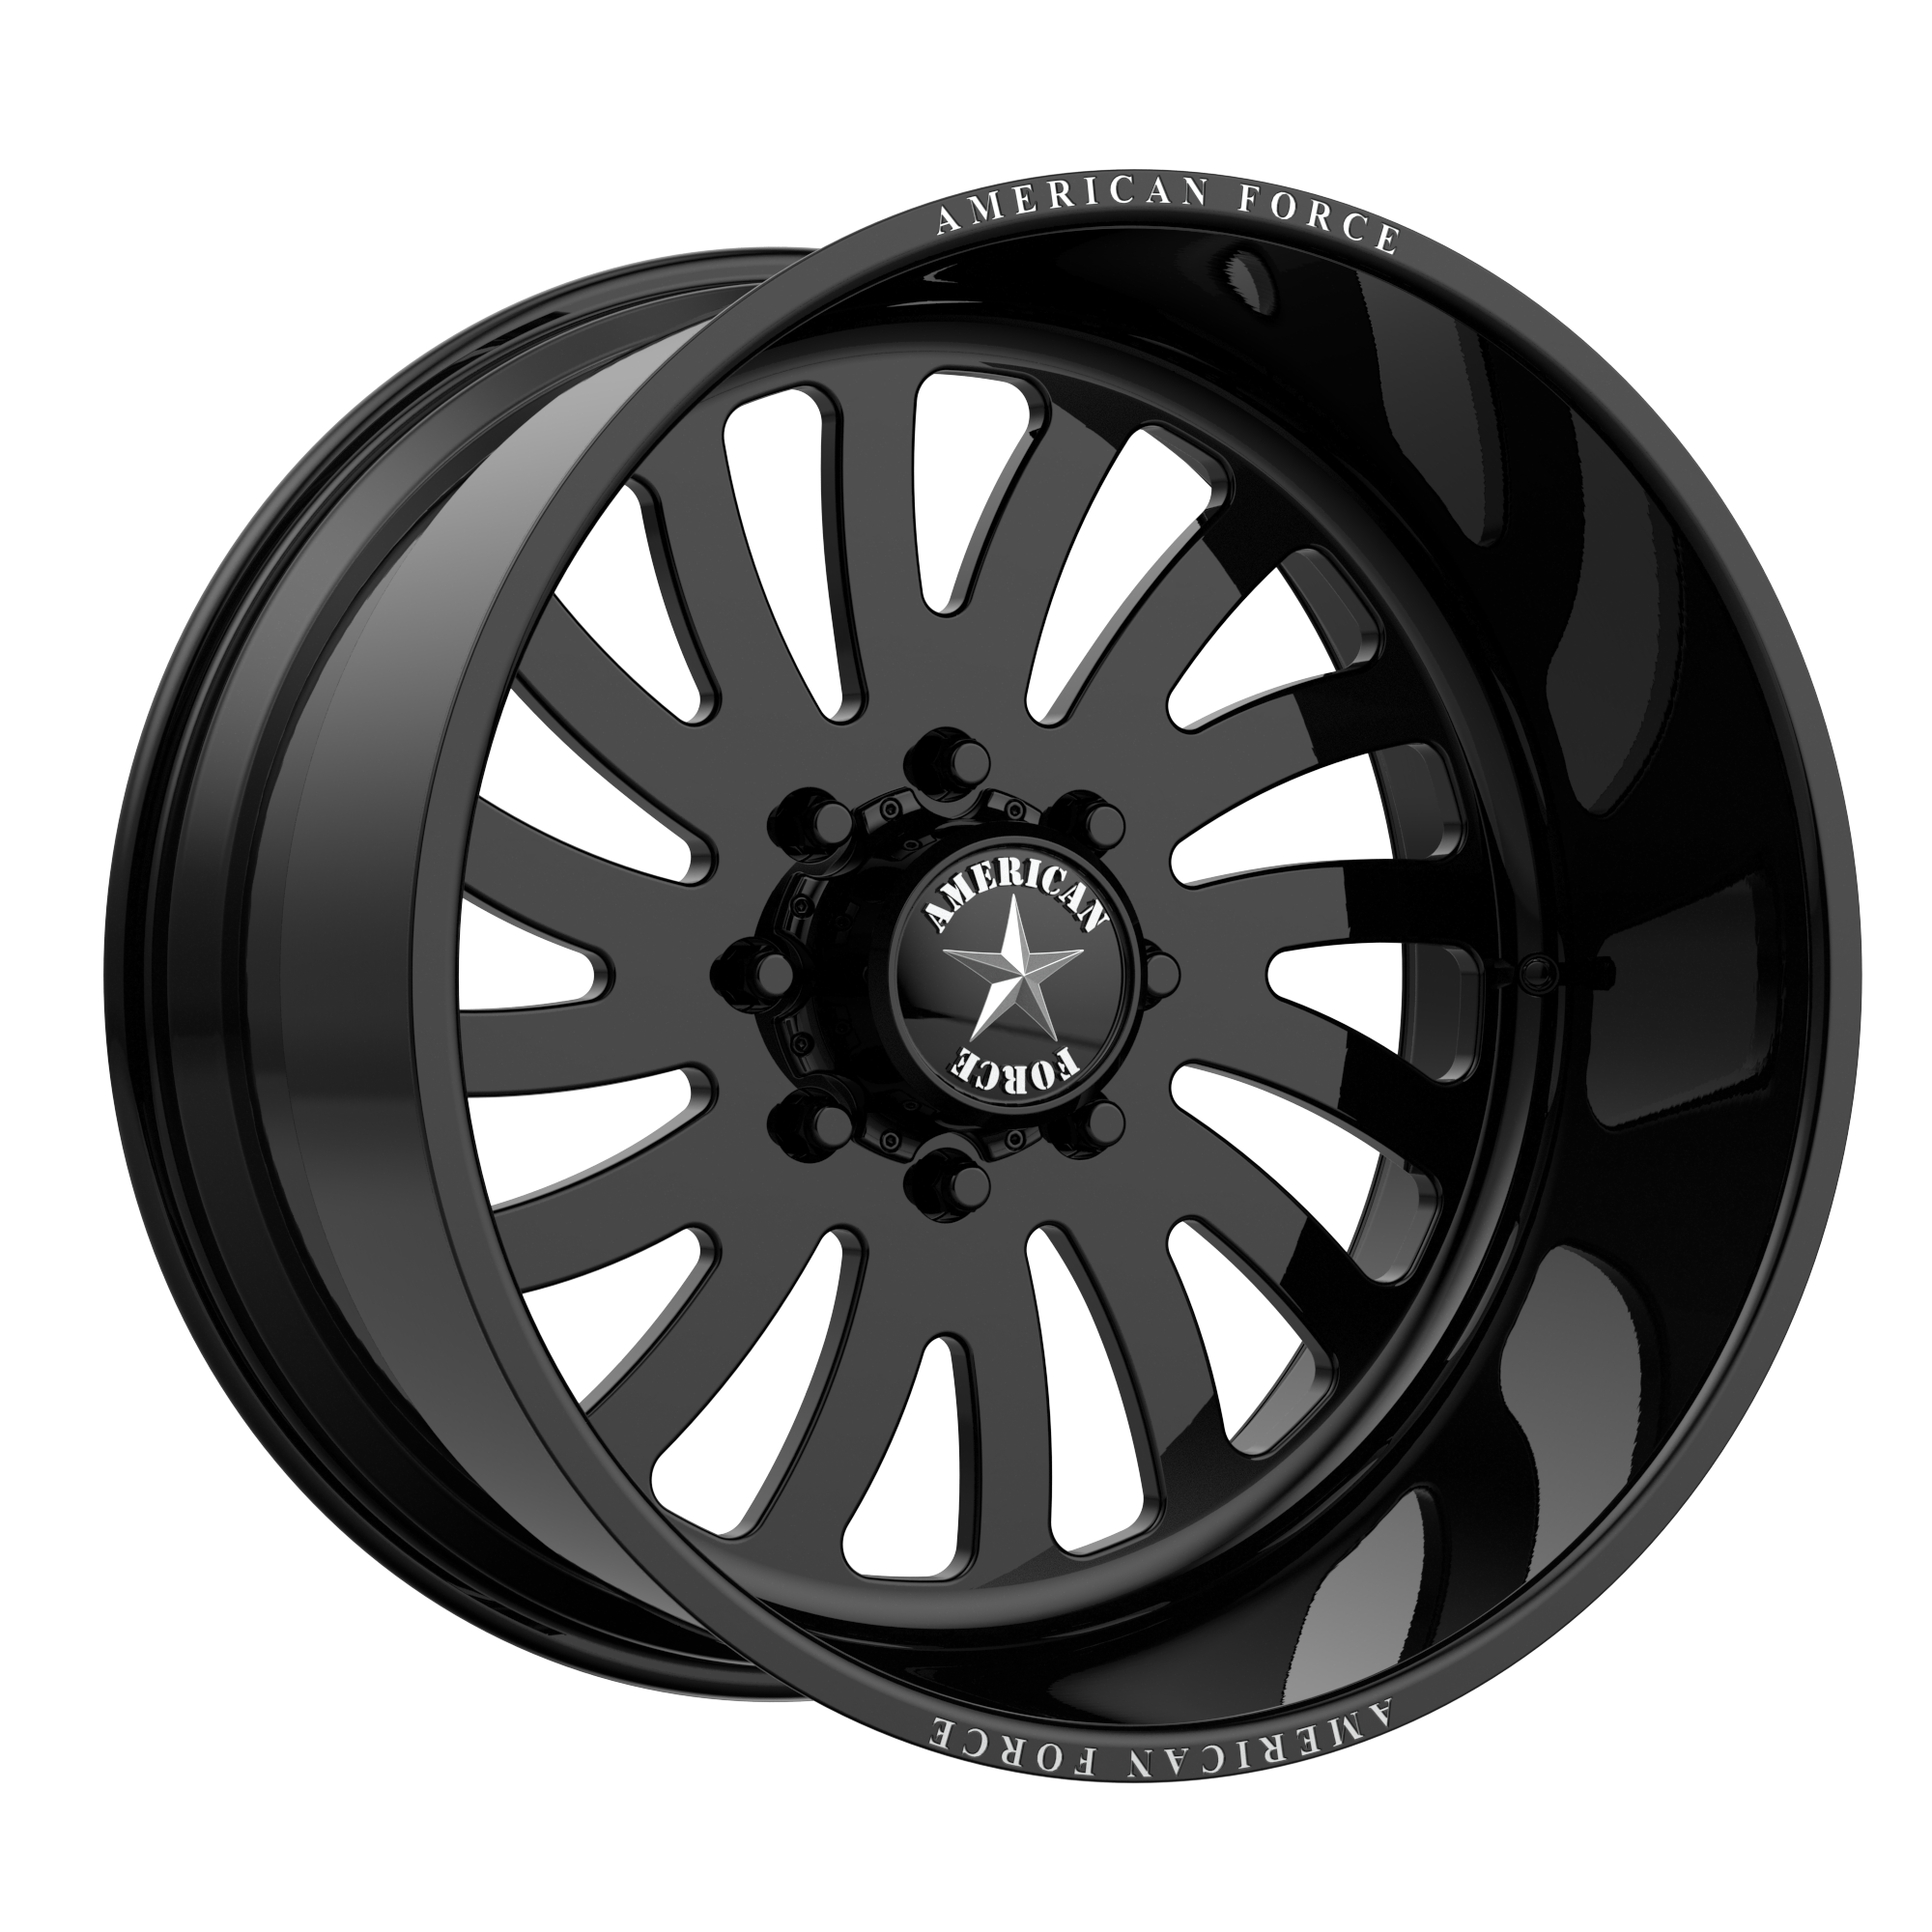 OCTANE SS 22x16 6x139.70 GLOSS BLACK MACHINED (-99 mm) - Tires and Engine Performance